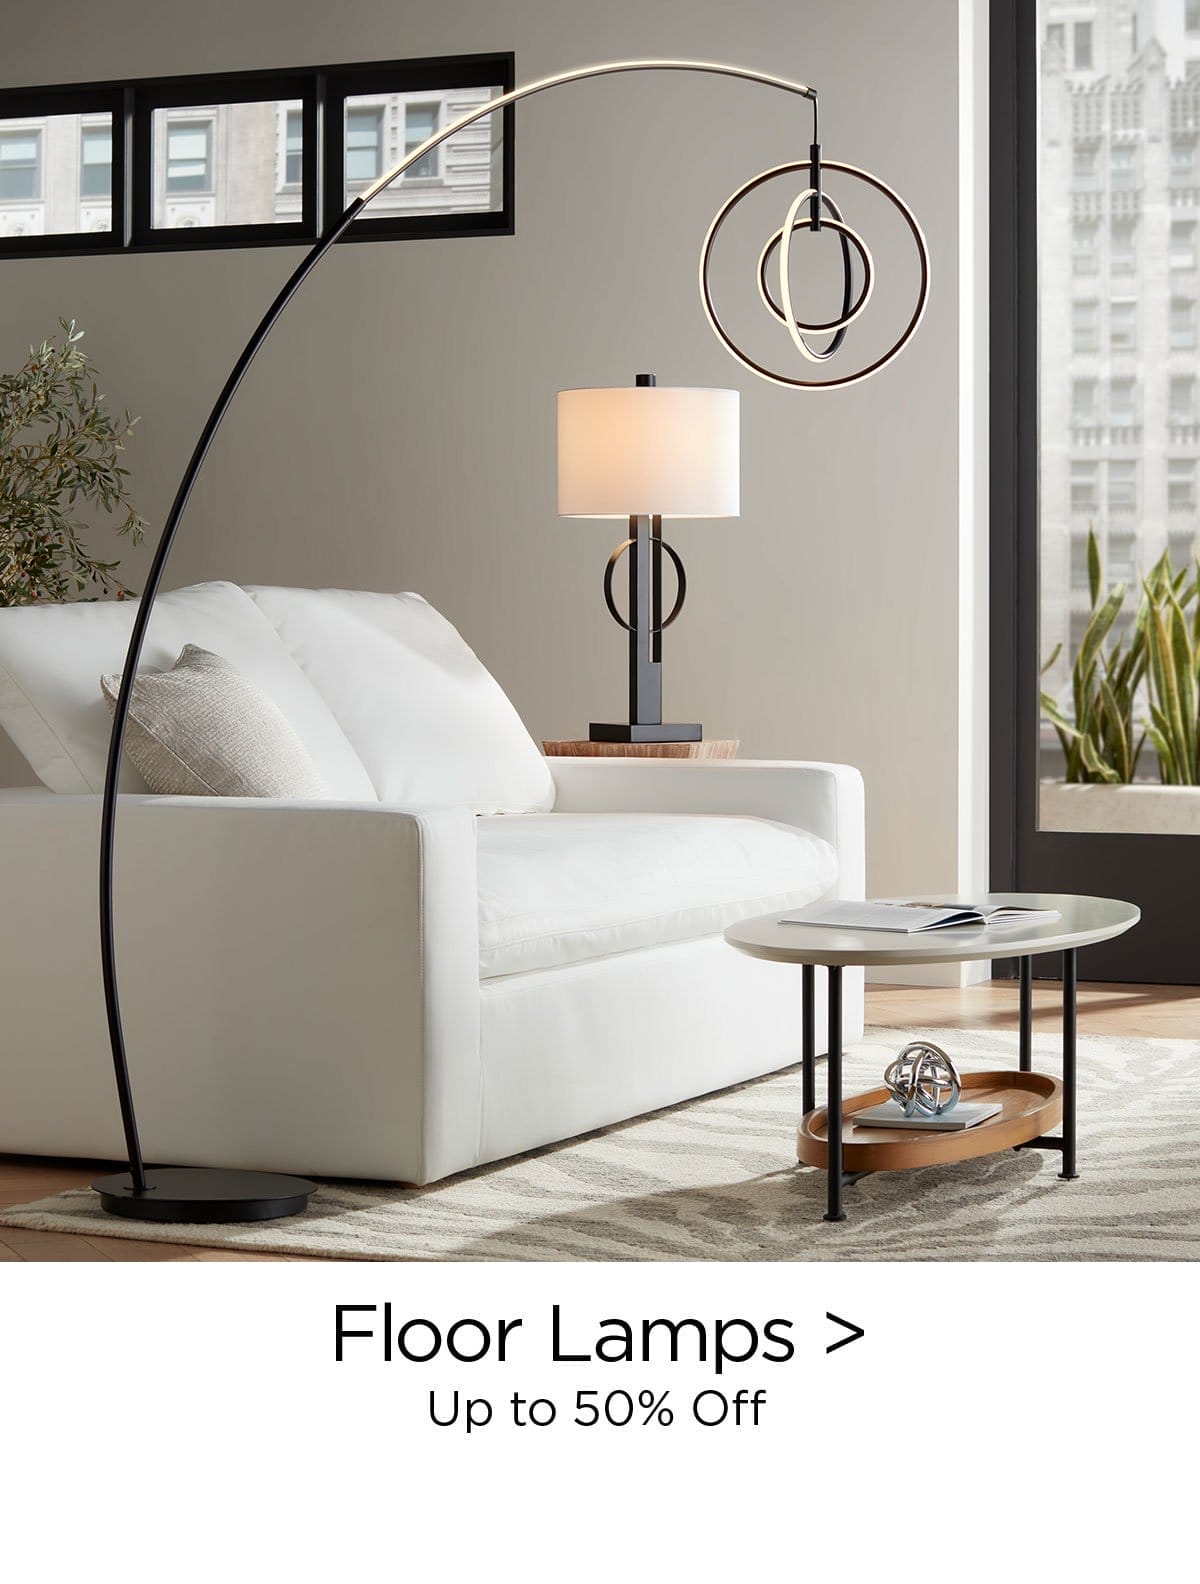 Floor Lamps > Up to 50% Off